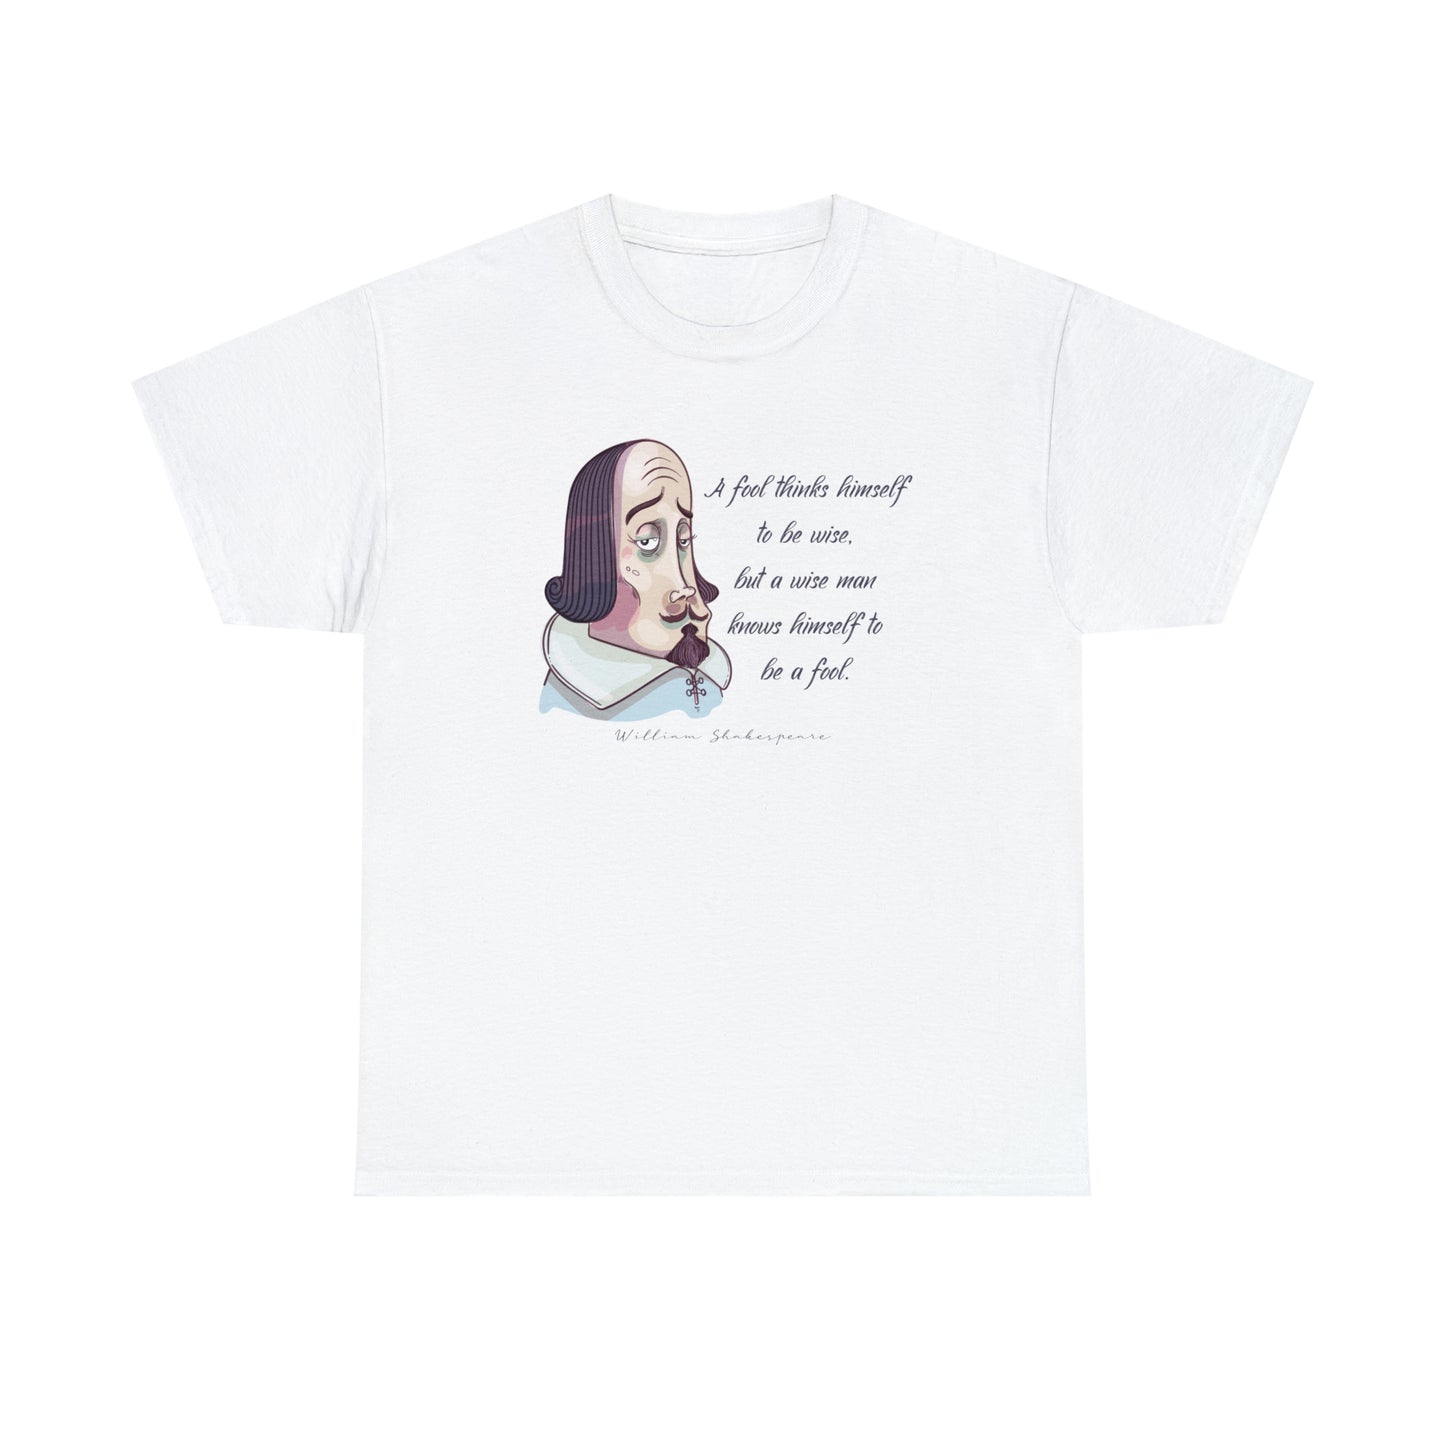 William Shakespeare T-Shirt With Shakespeare Quote TShirt For Fools T Shirt For Wise Man Shirt For Literary T-Shirt